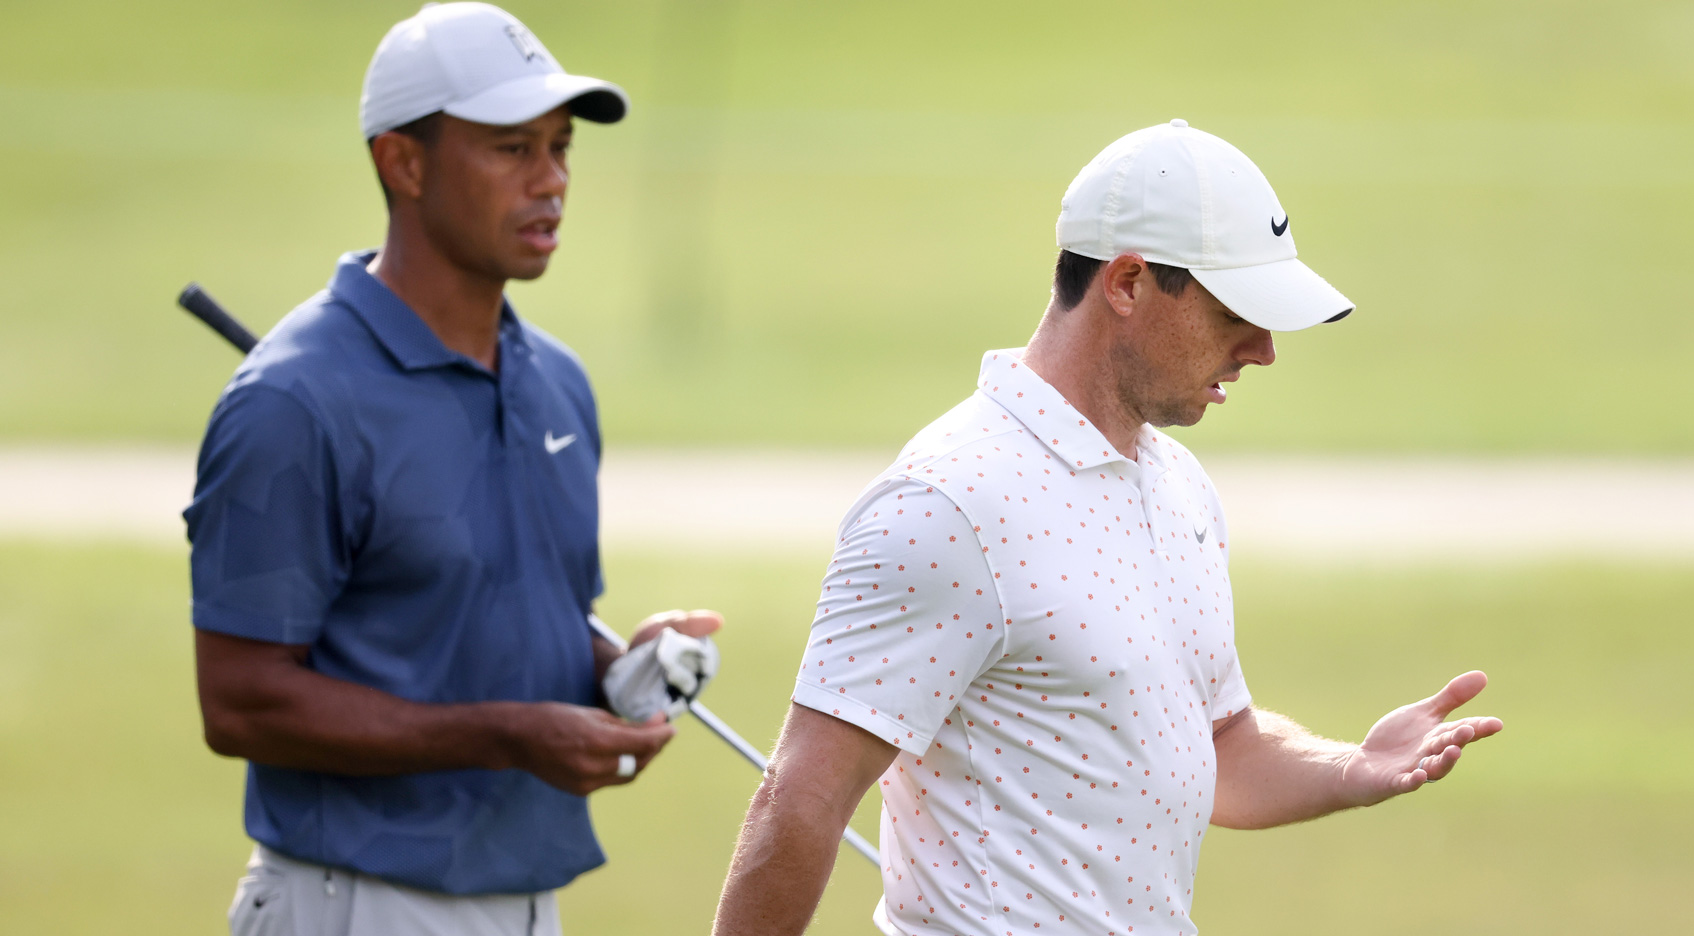 Rory McIlroy, Tiger Woods not at their best at TPC Boston